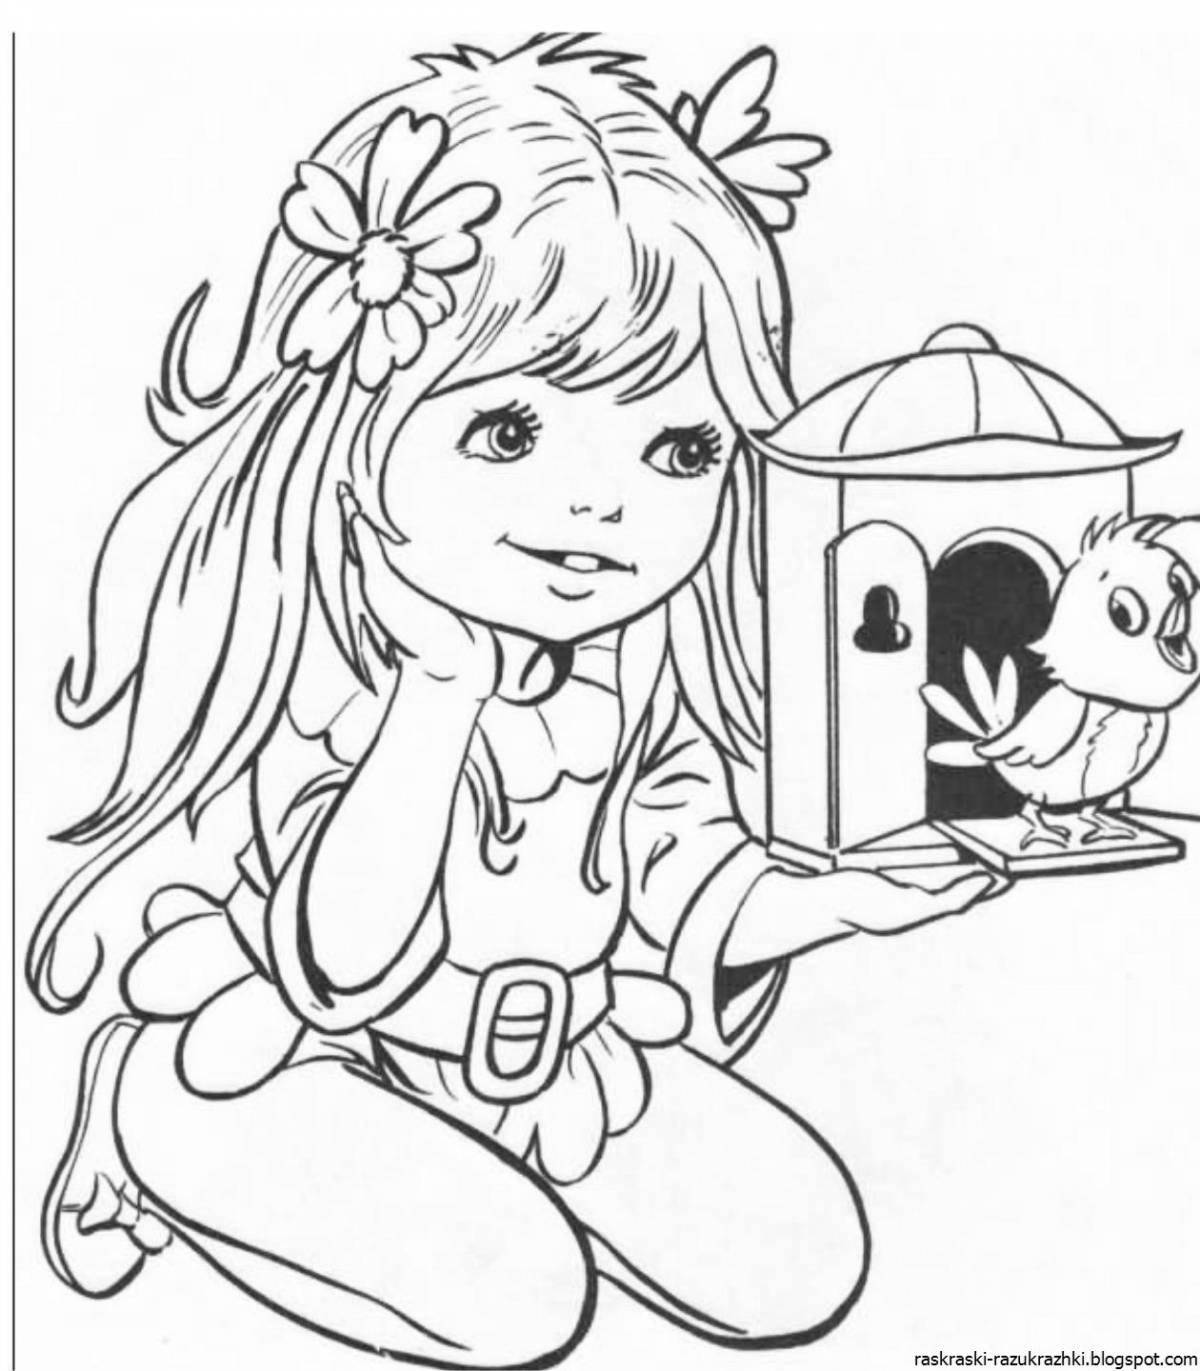 Charming coloring page turn on